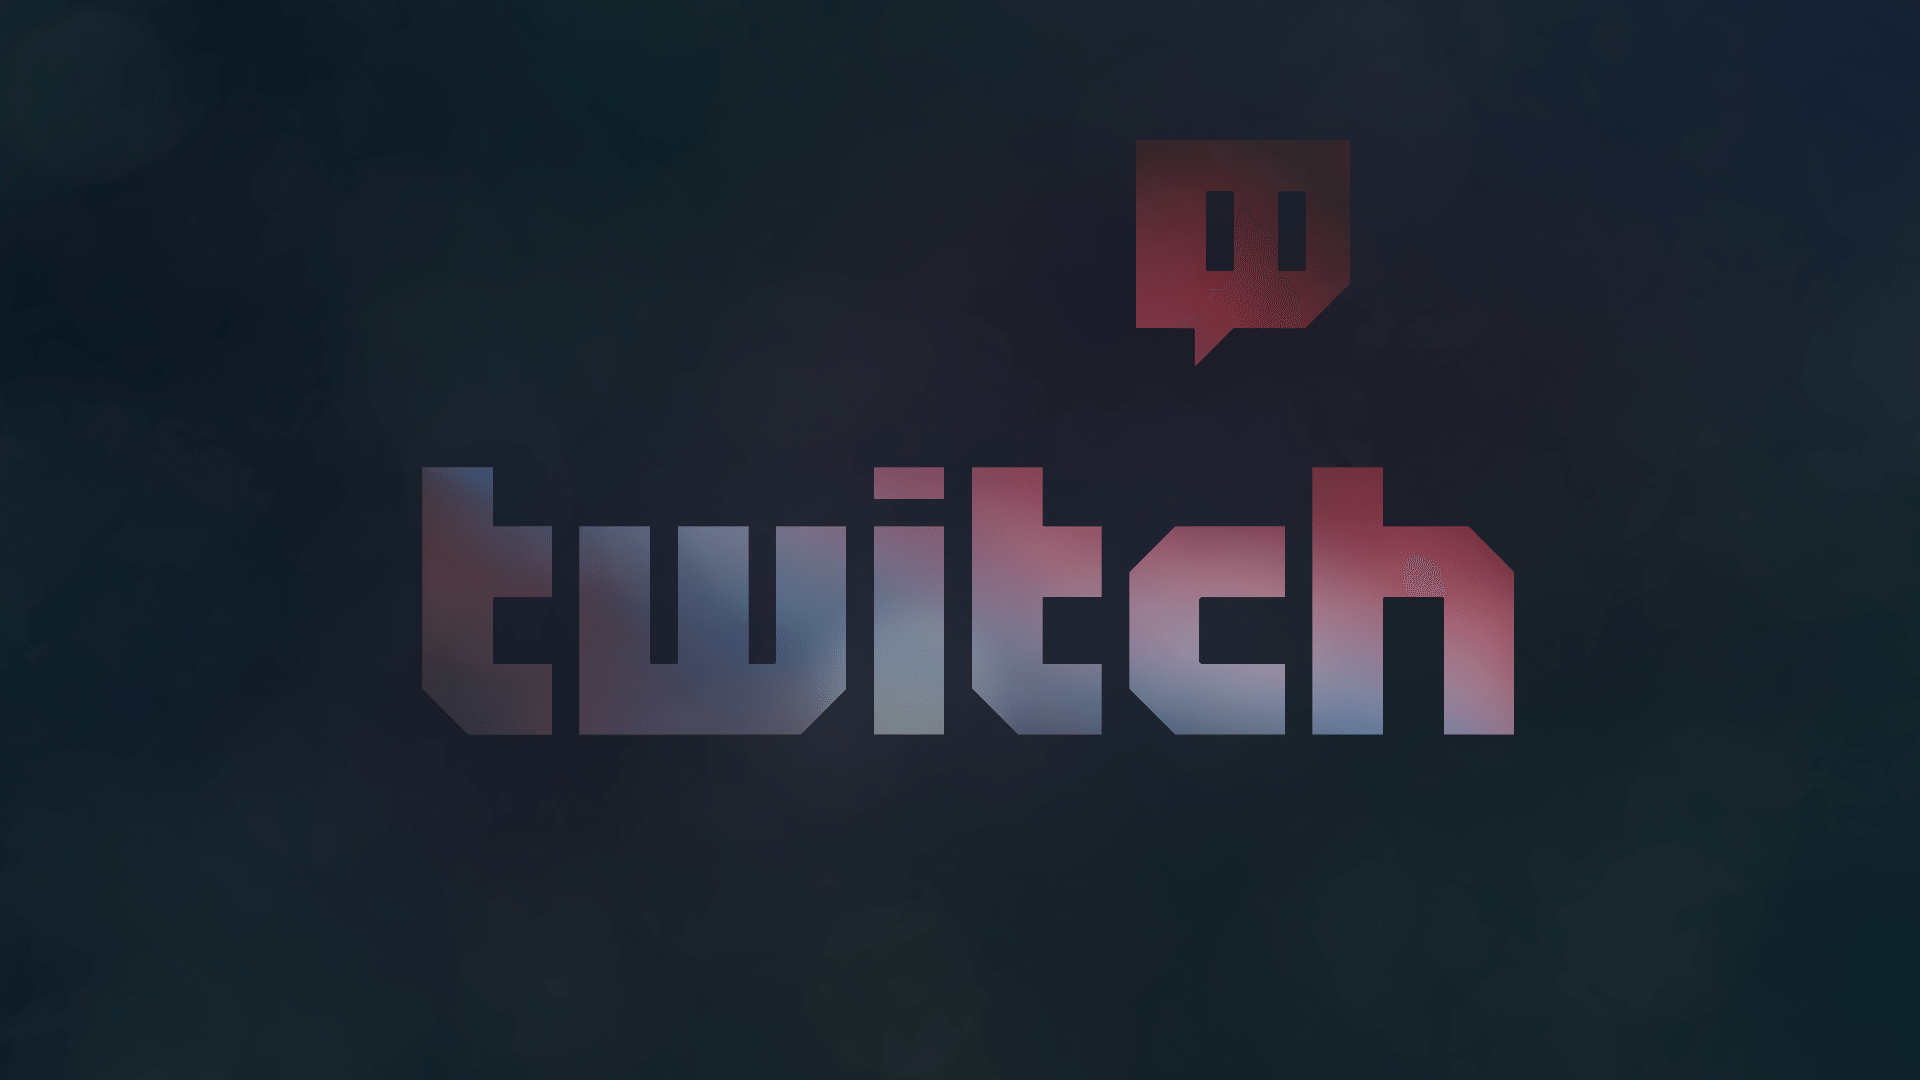 Twitch Wallpaper HD From Gallsource